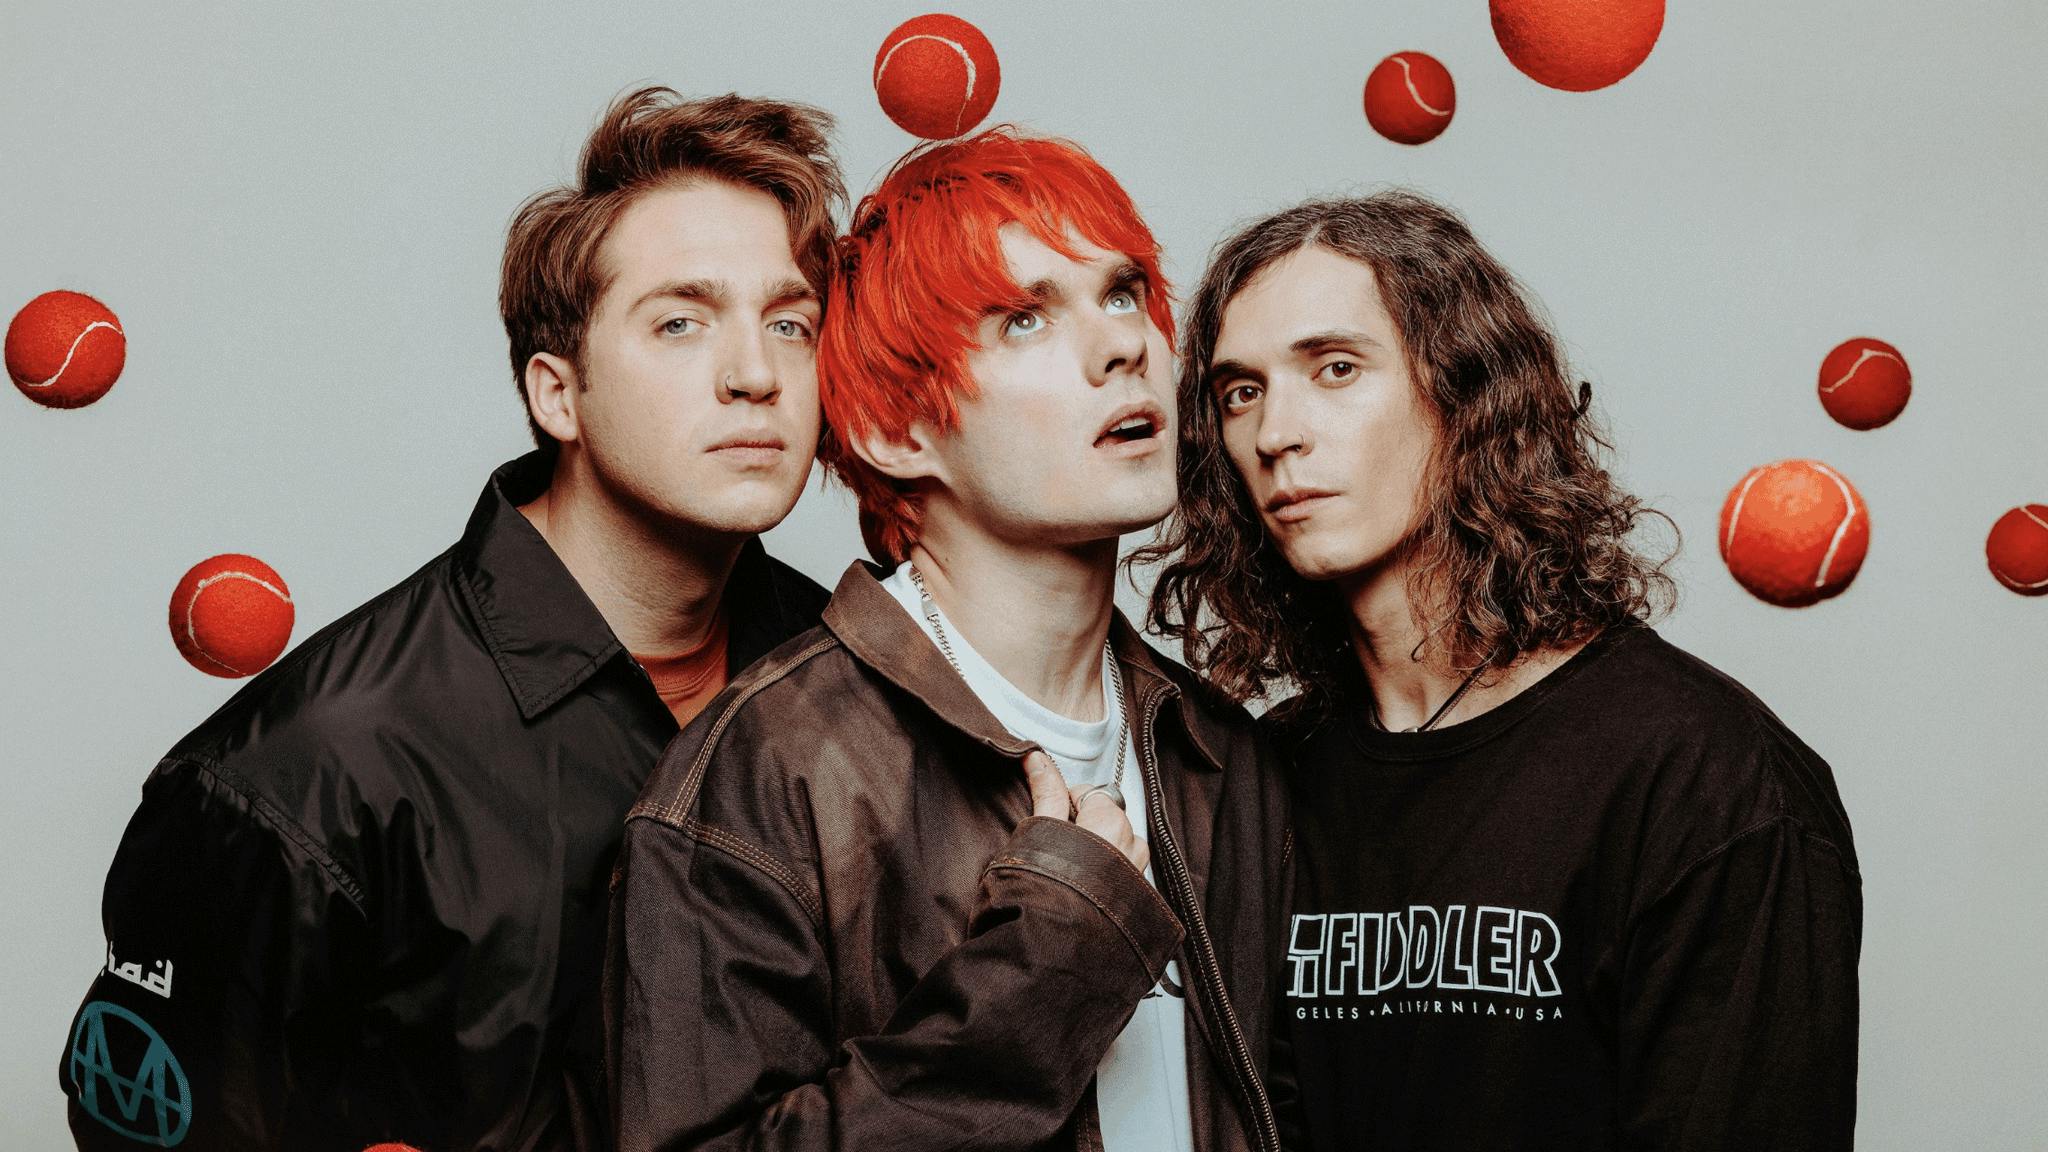 Waterparks announce UK tour with Stand Atlantic